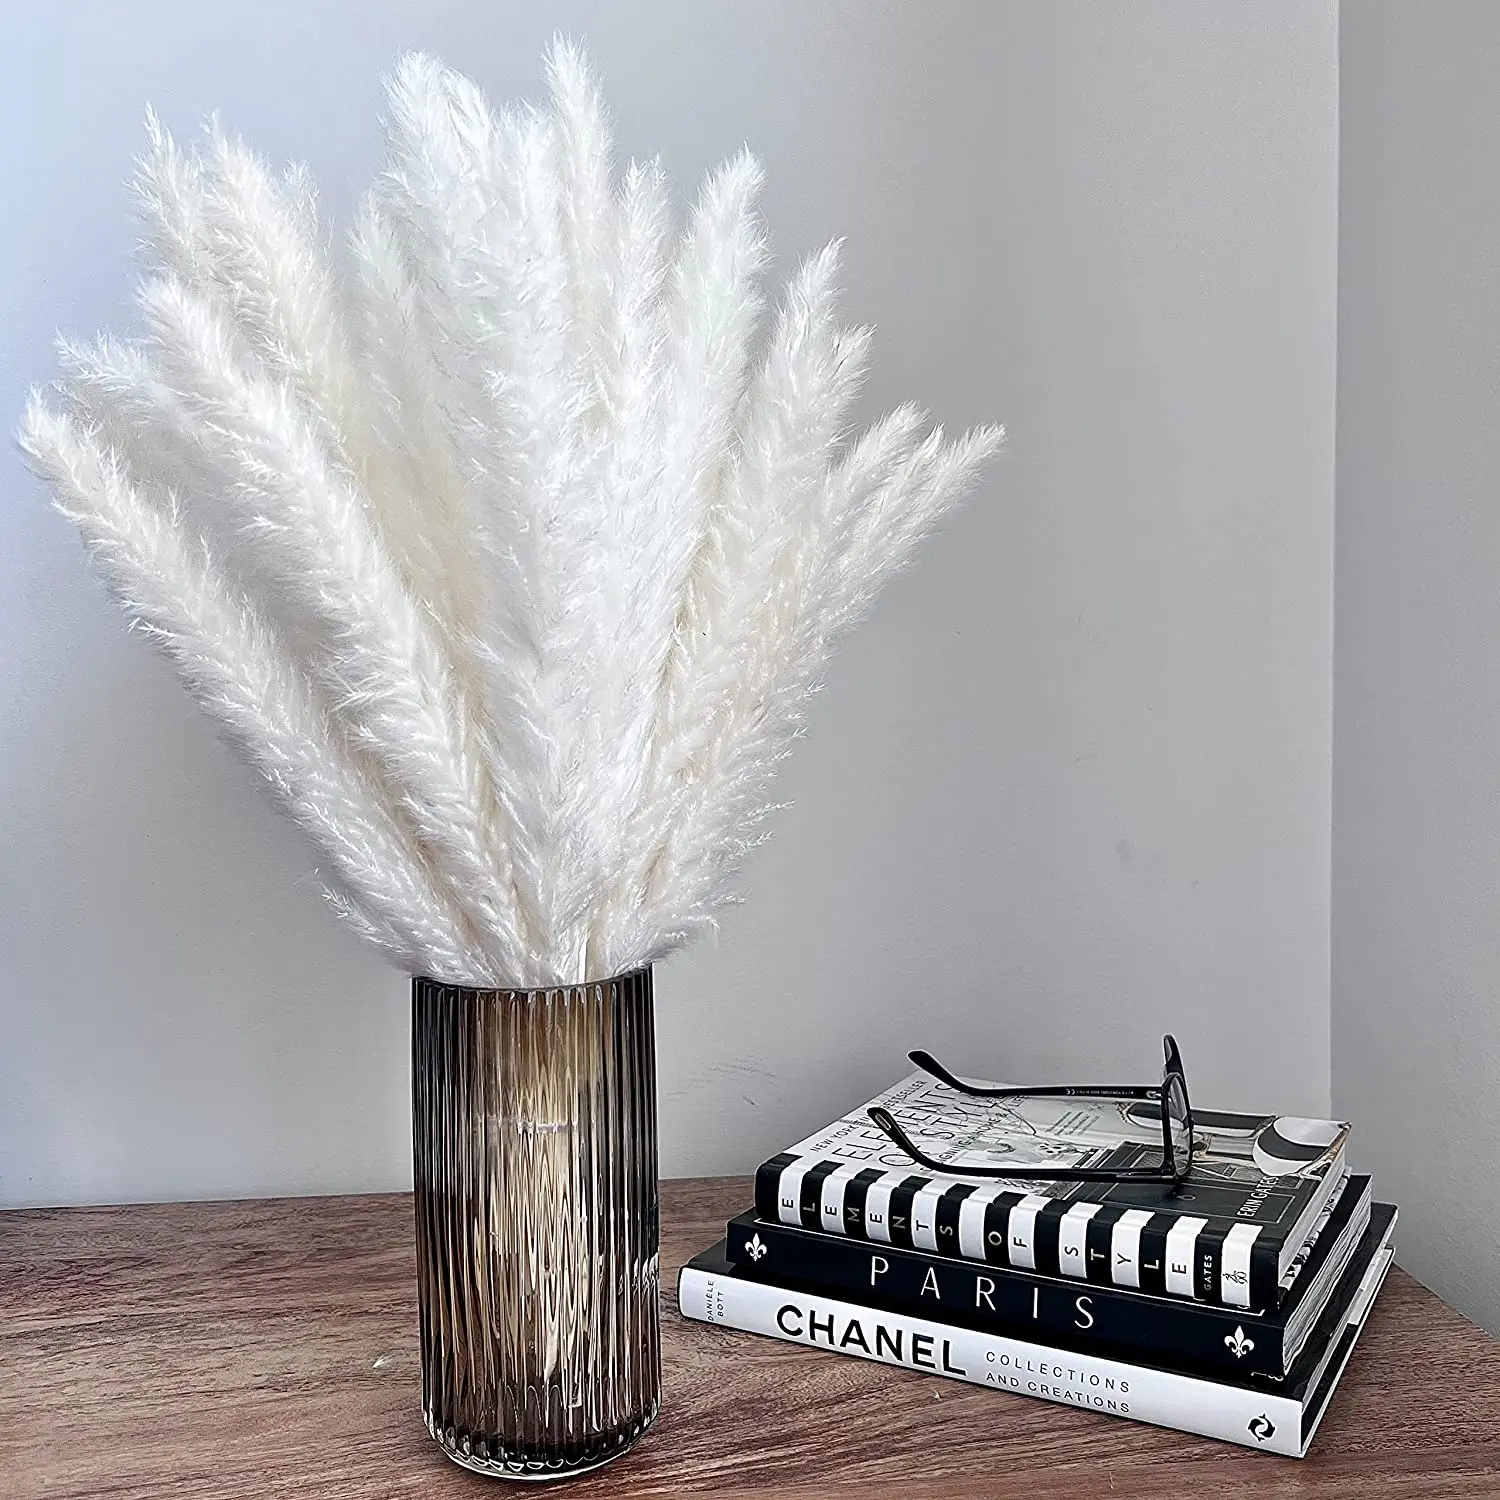 

30pcs Pampas Natural Dried Flowers Pampa Grass Real Reed Small Bulrush Bouquet White Plumes Home Office Decor Wedding Decoration